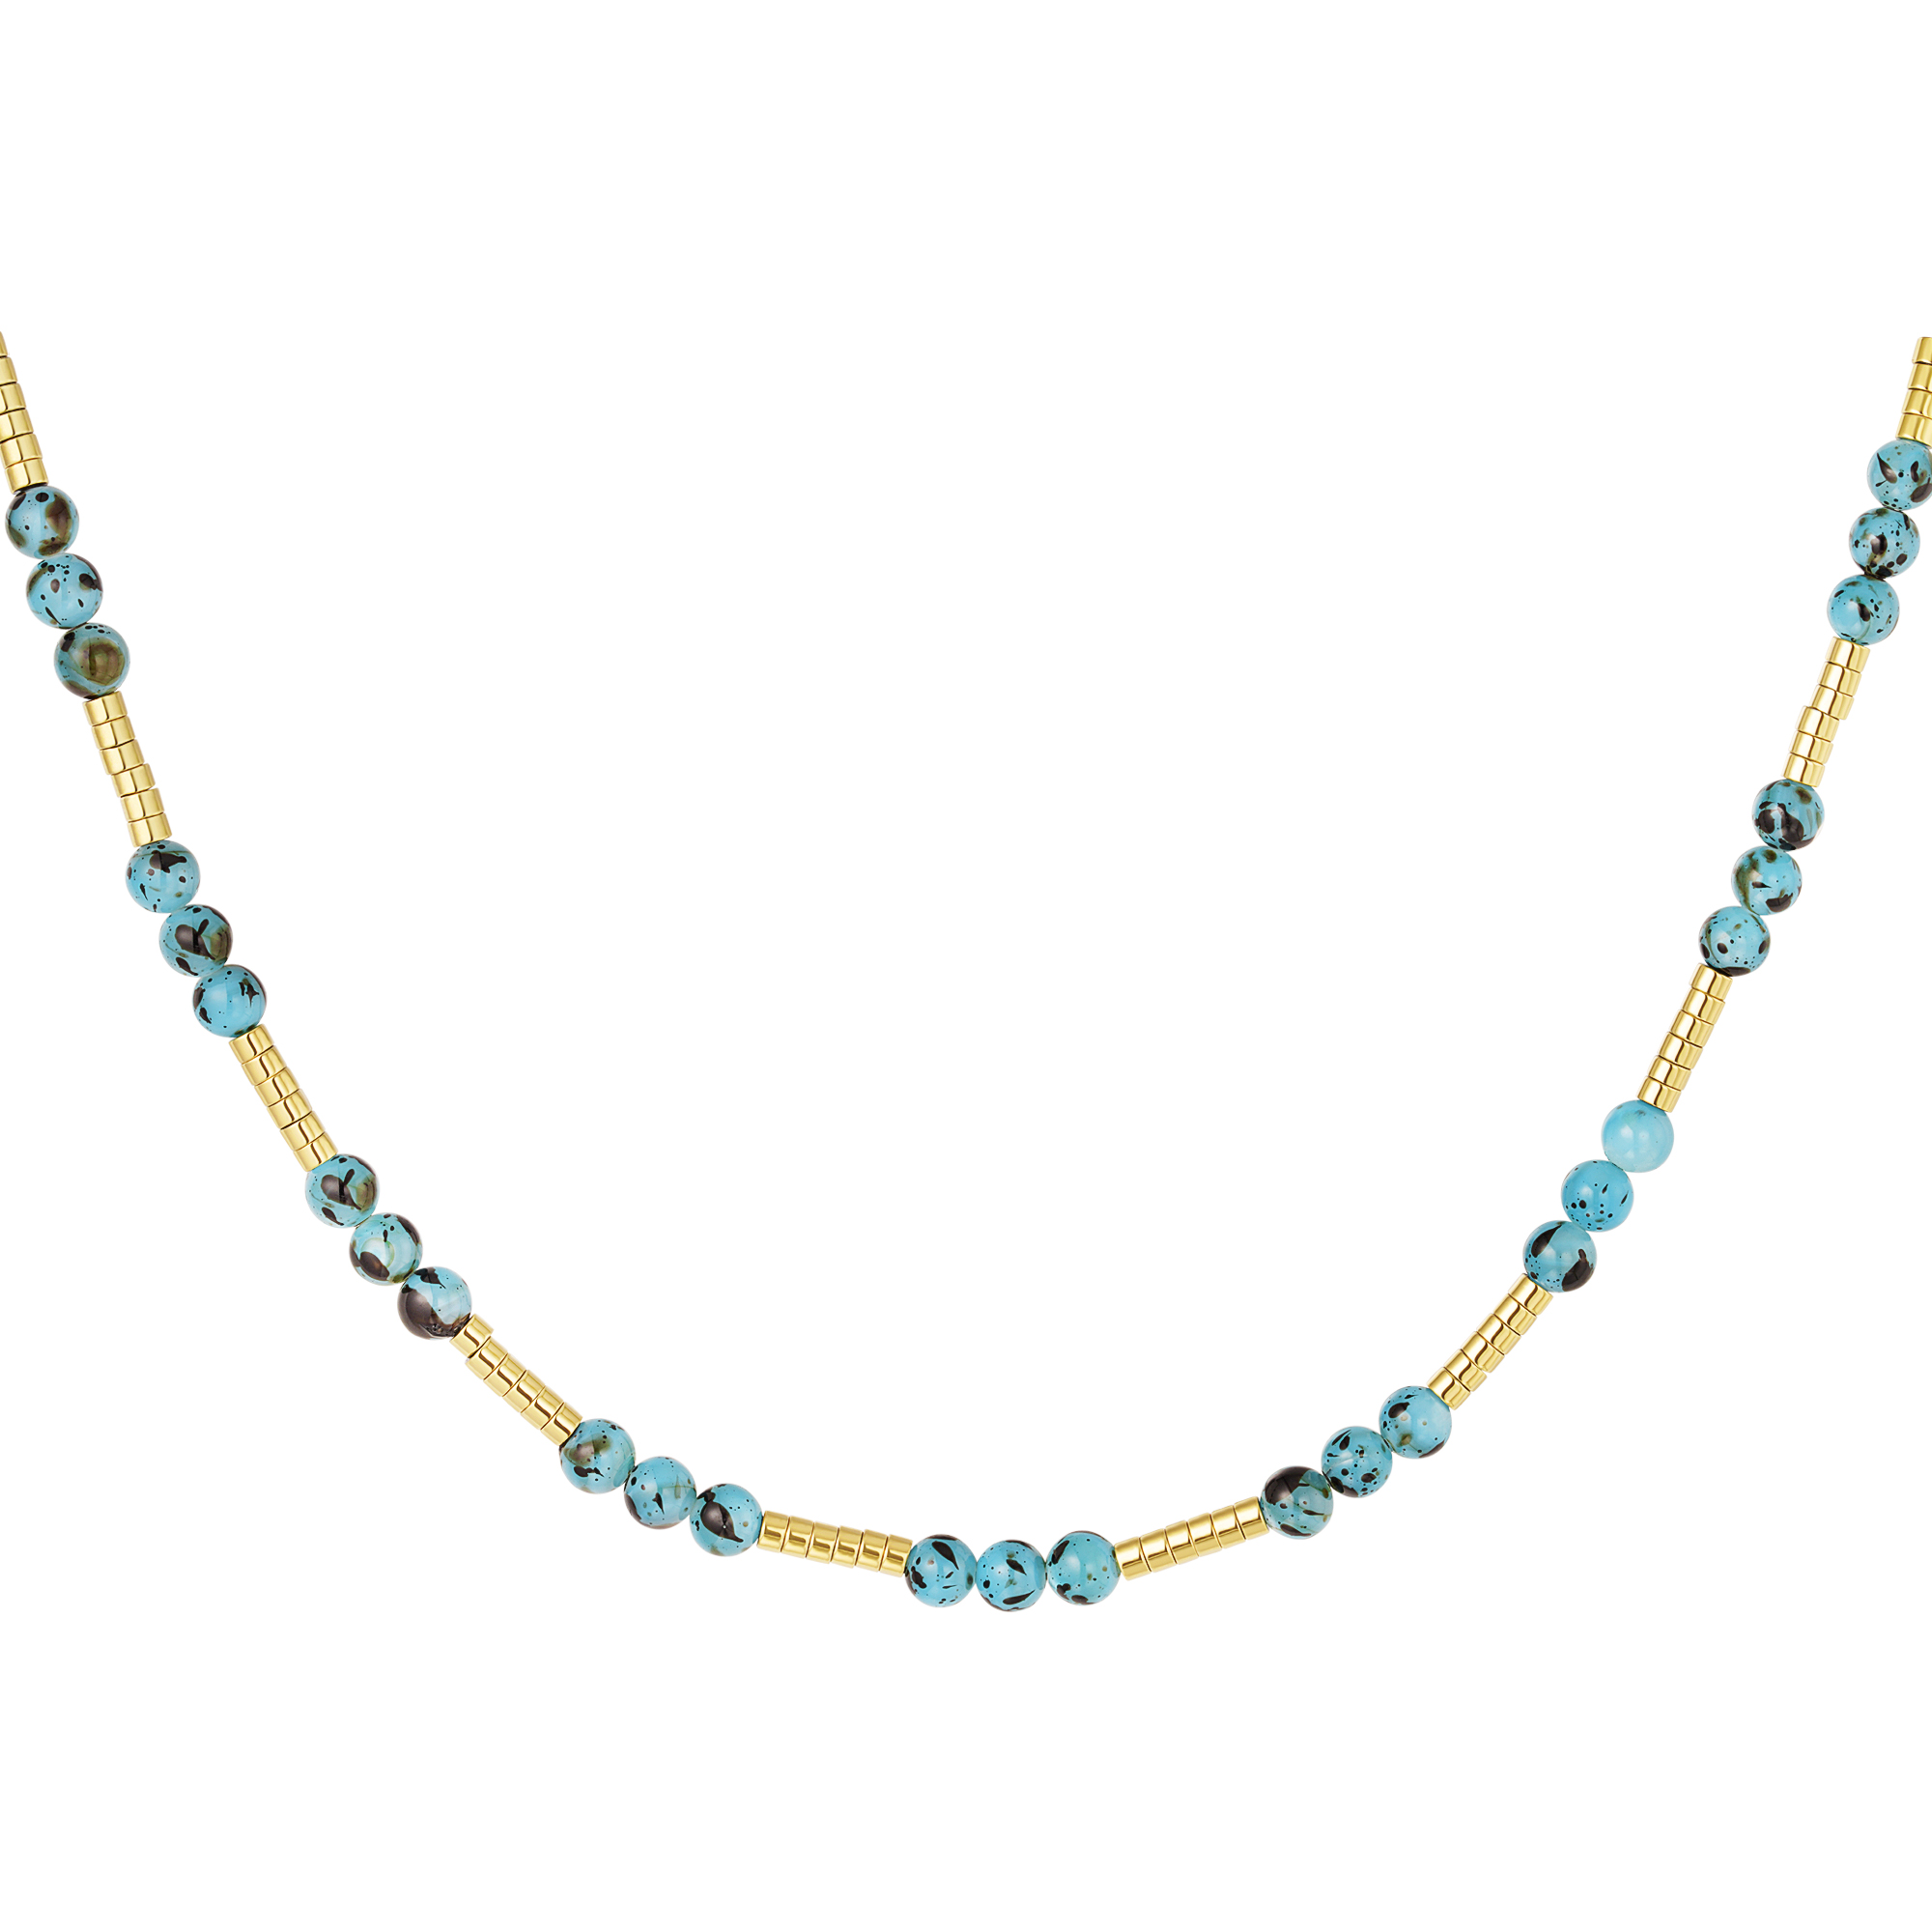 Beaded necklace with blue natural stone